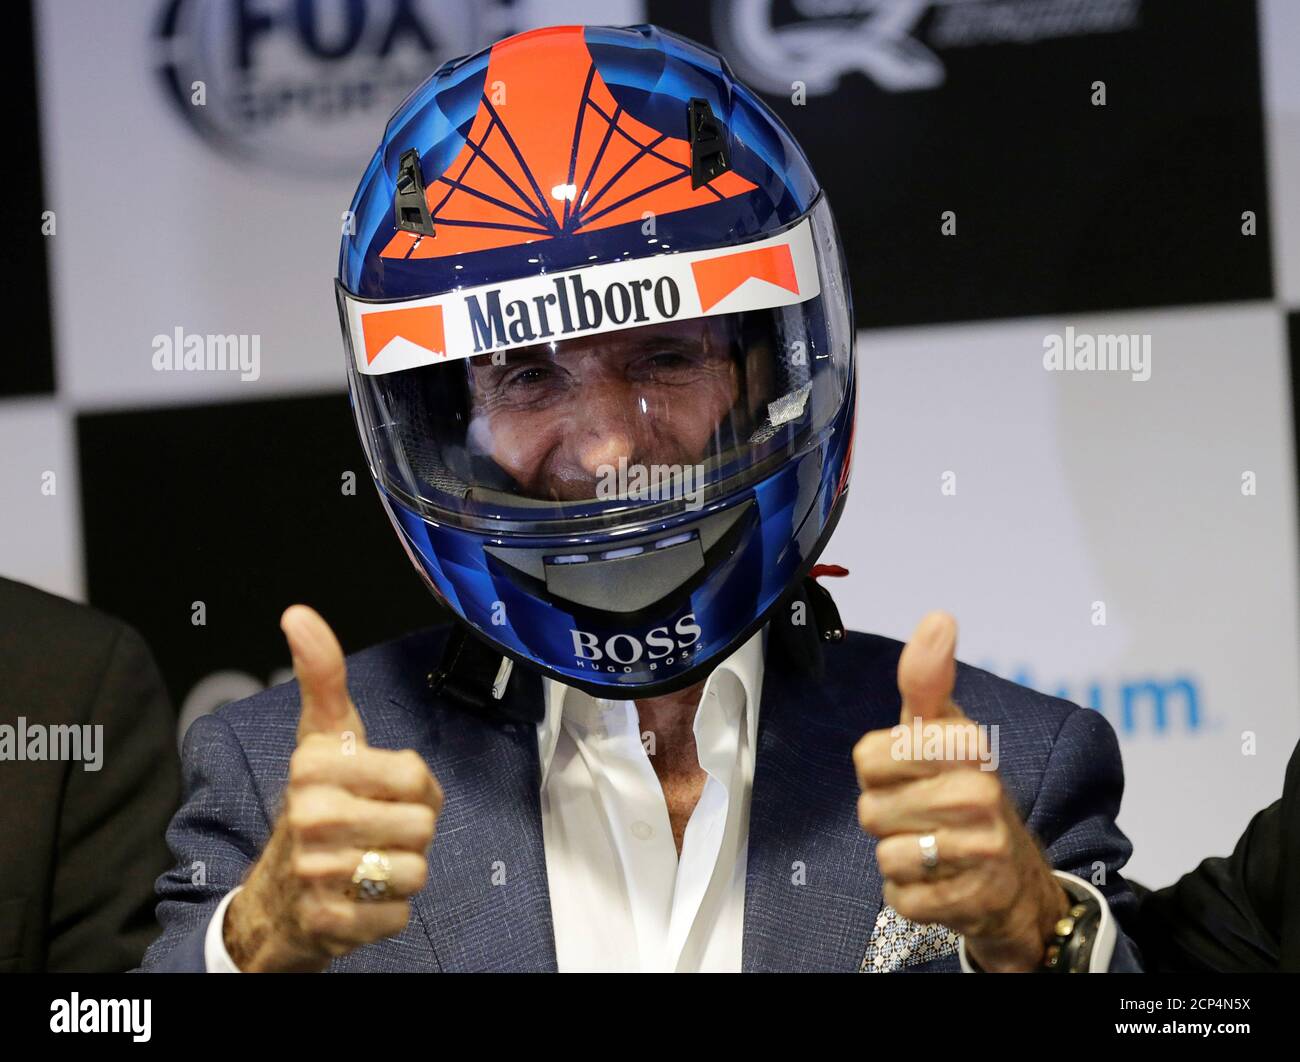 Former Brazilian Formula One driver Emerson Fittipaldi poses with a helmet during a news conference about F1- FanZone in Mexico City, Mexico September 27, 2016. REUTERS/Henry Romero Stock Photo